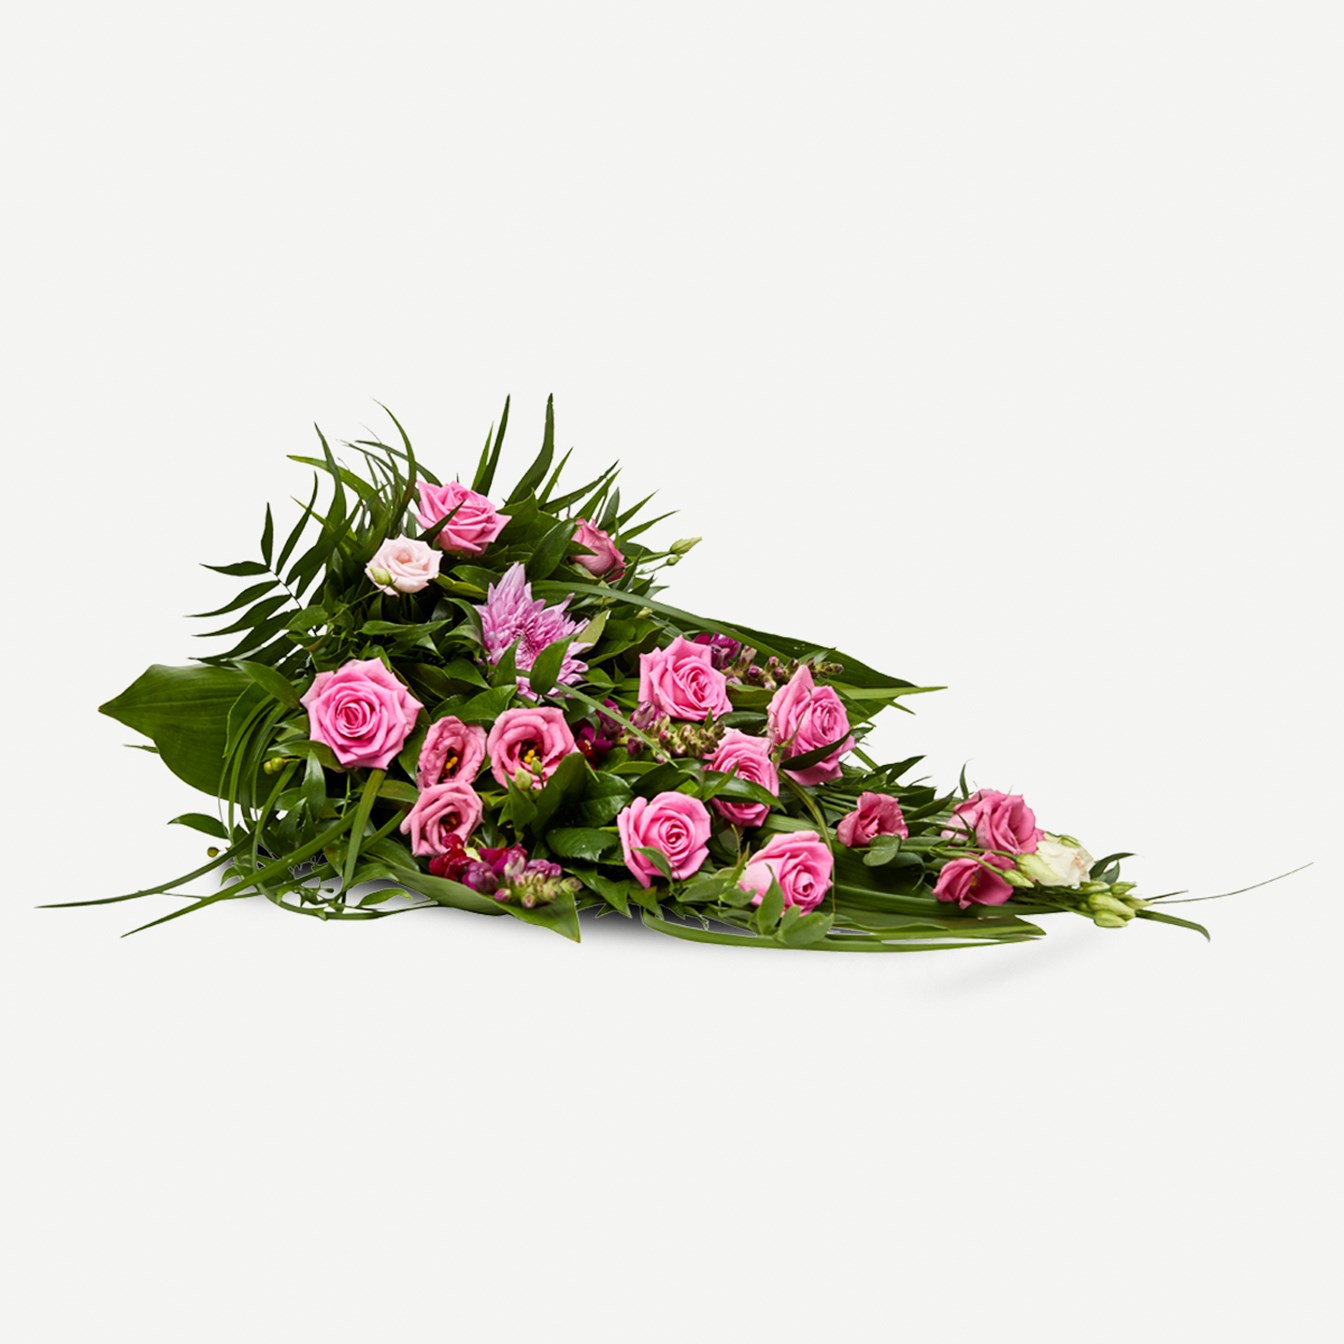 product image for Classic funeral spray - pink